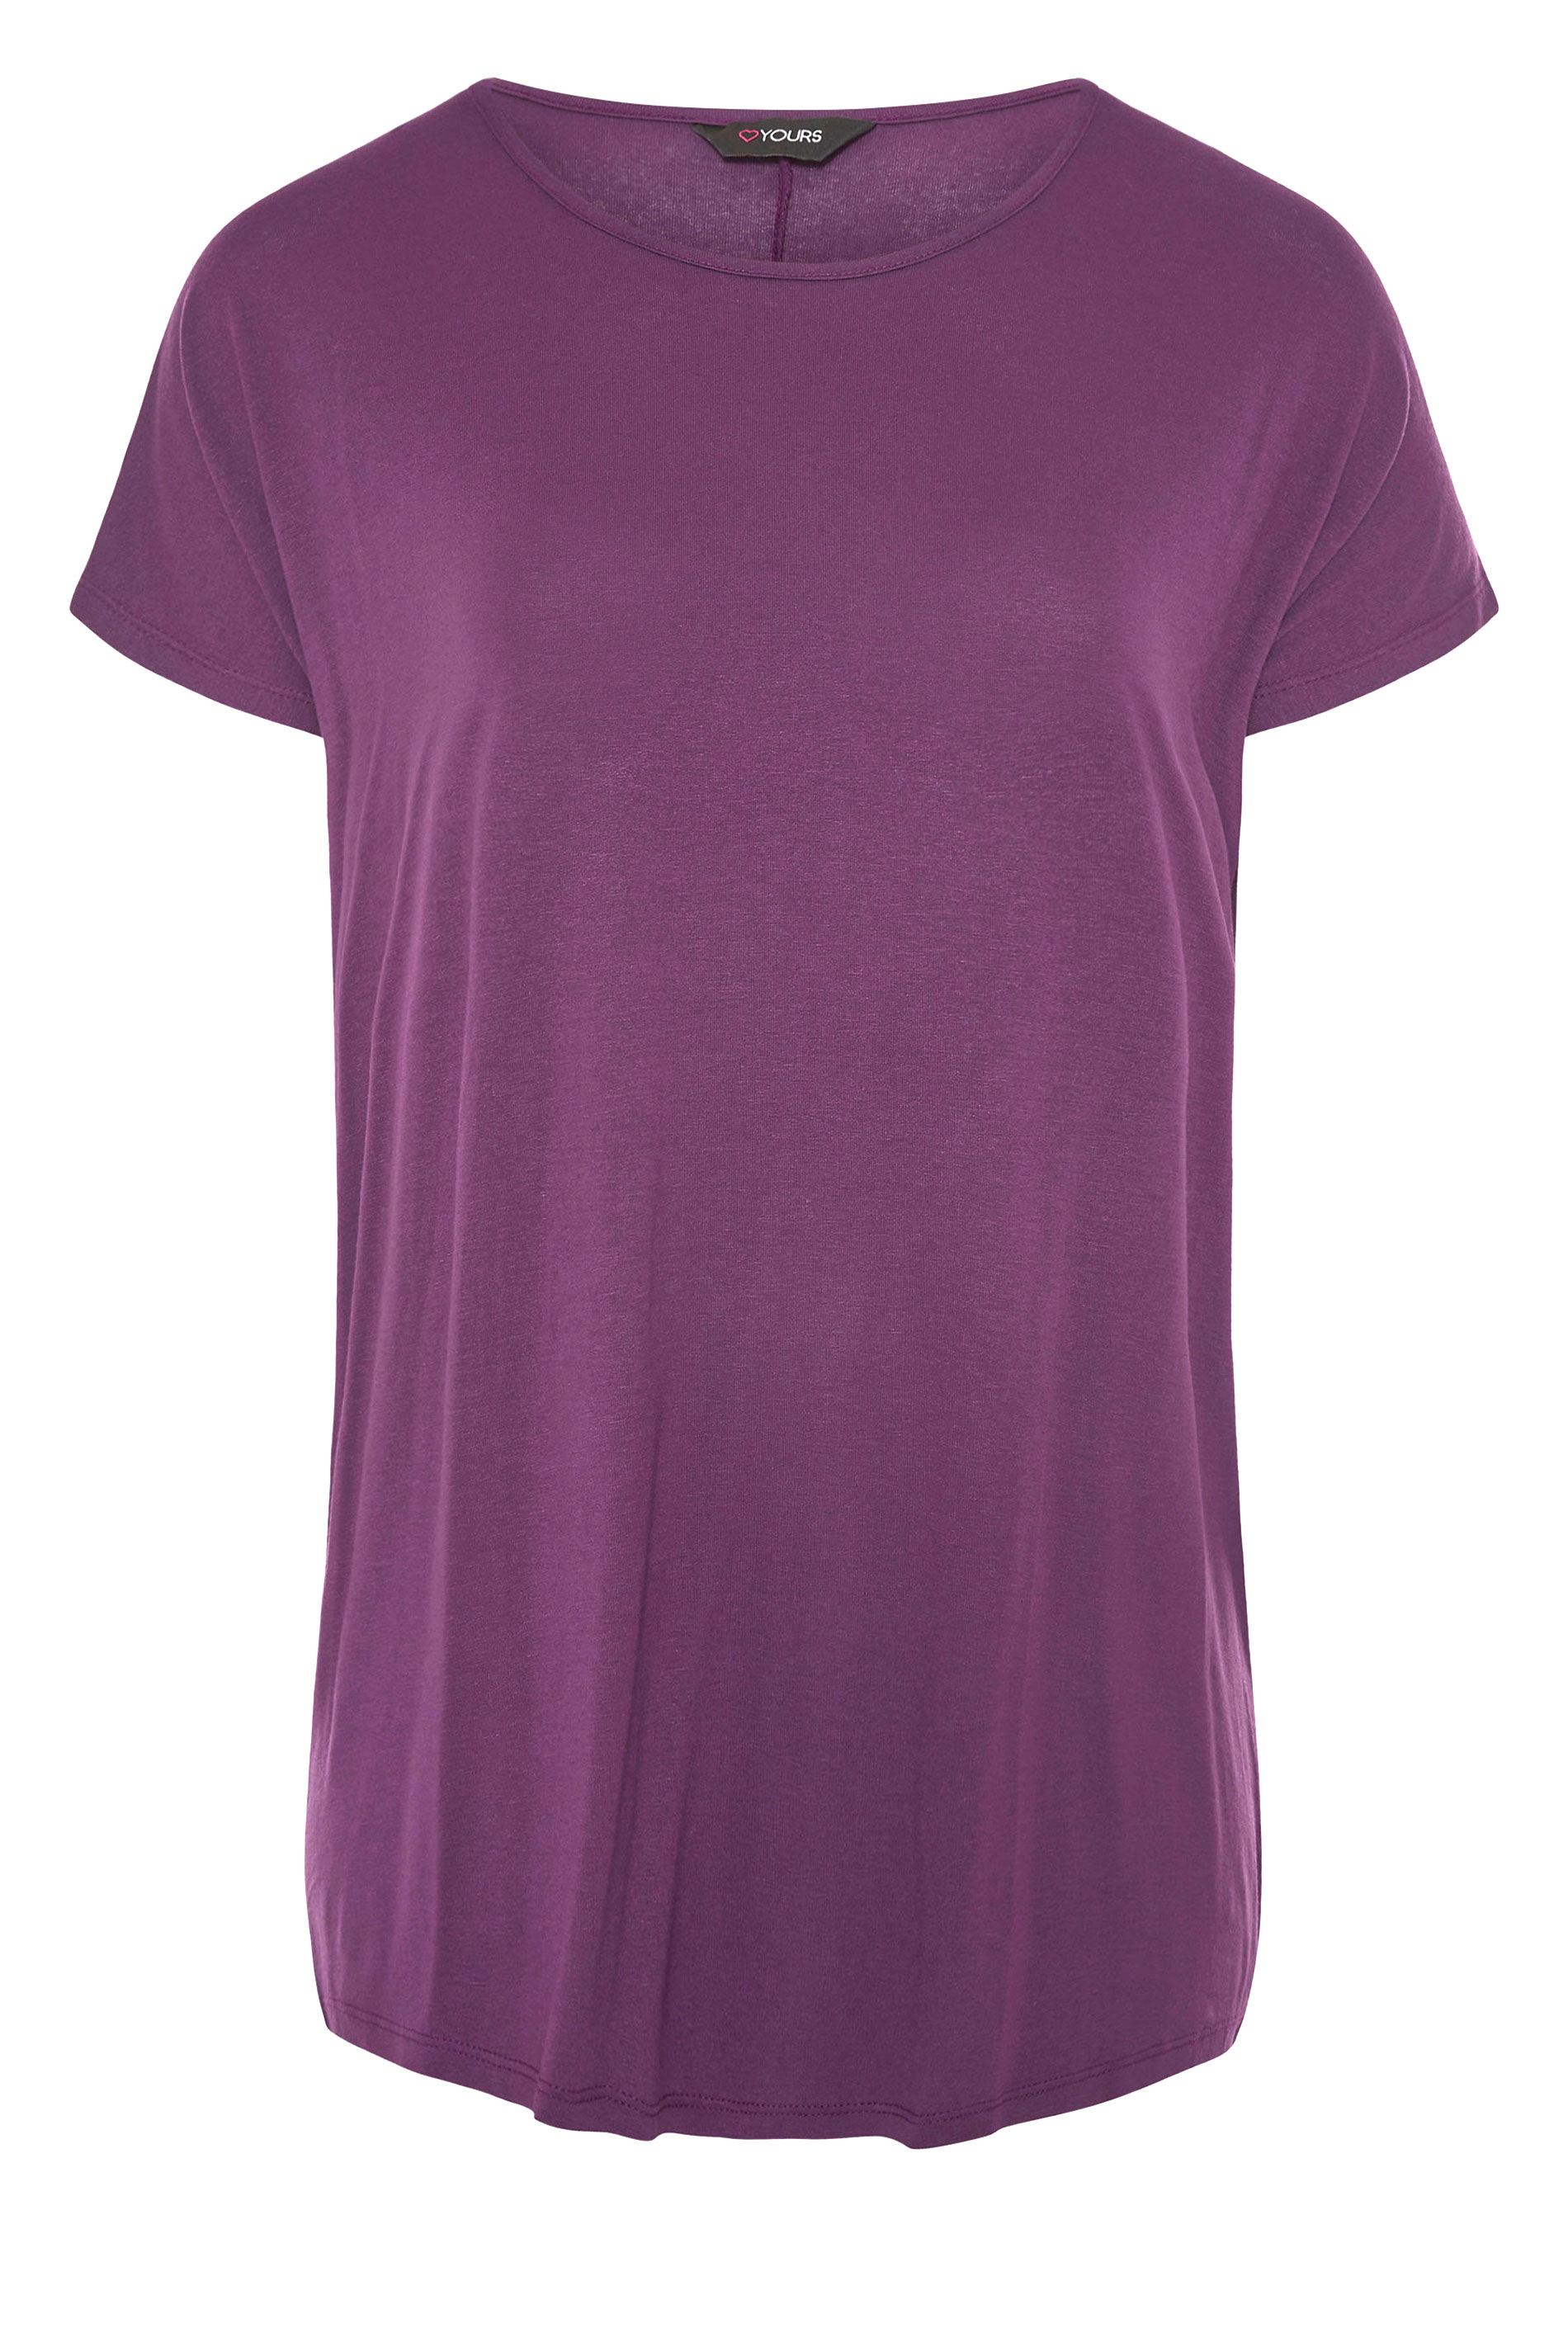 Grande taille  Tops Grande taille  T-Shirts | T-Shirt Violet Ourlet Plongeant - SA57484